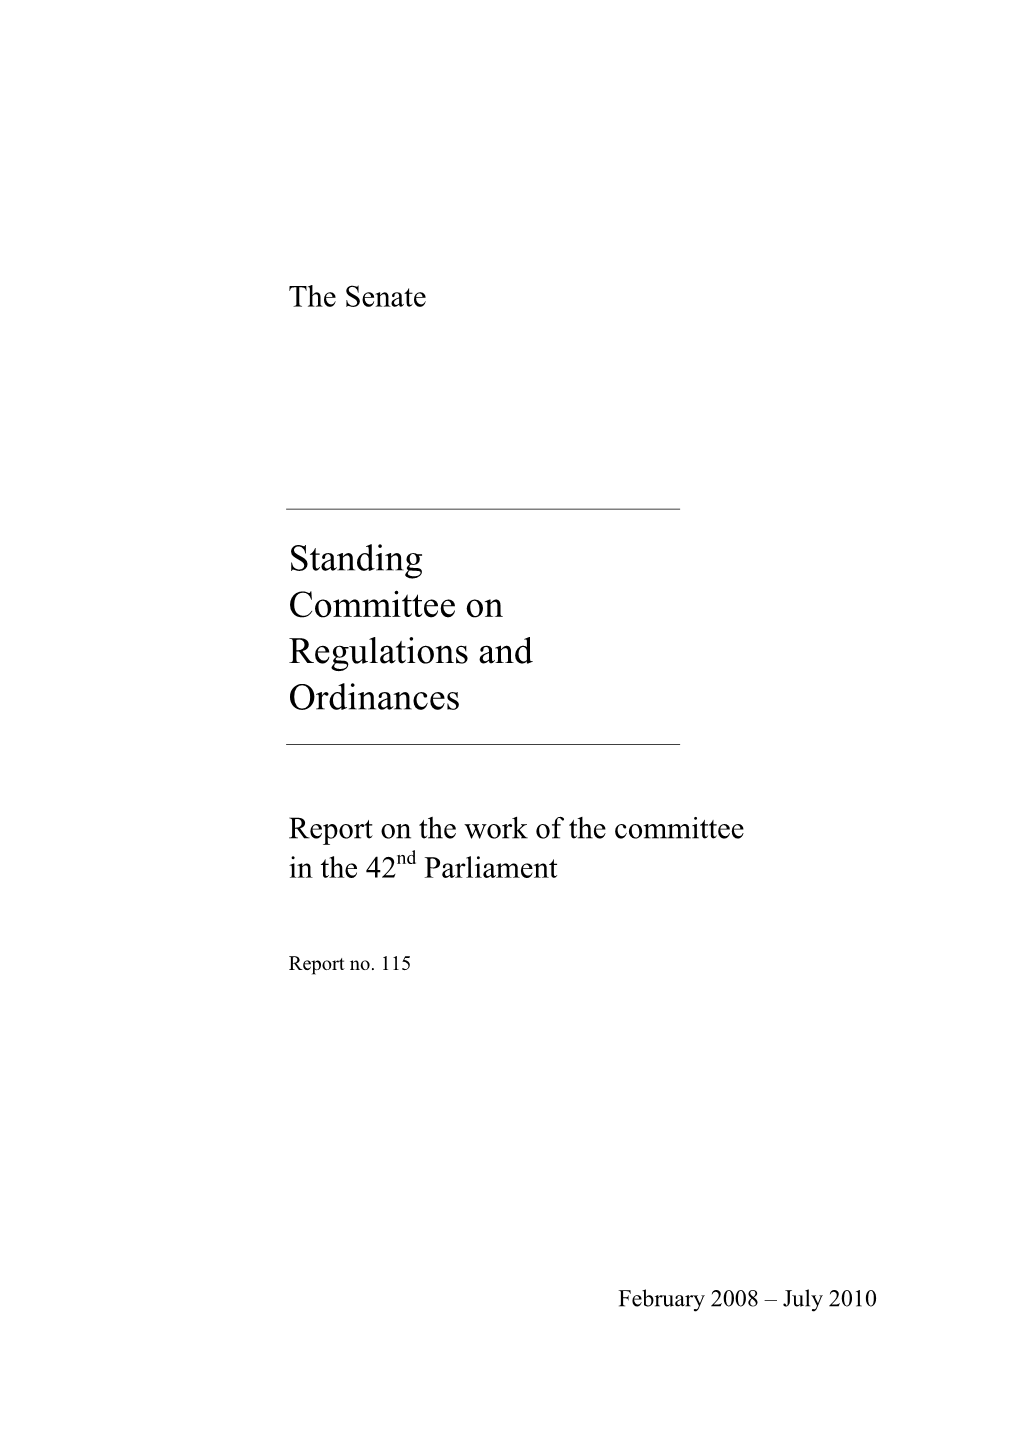 Report on the Work of the Committee in the 42Nd Parliament; Report No